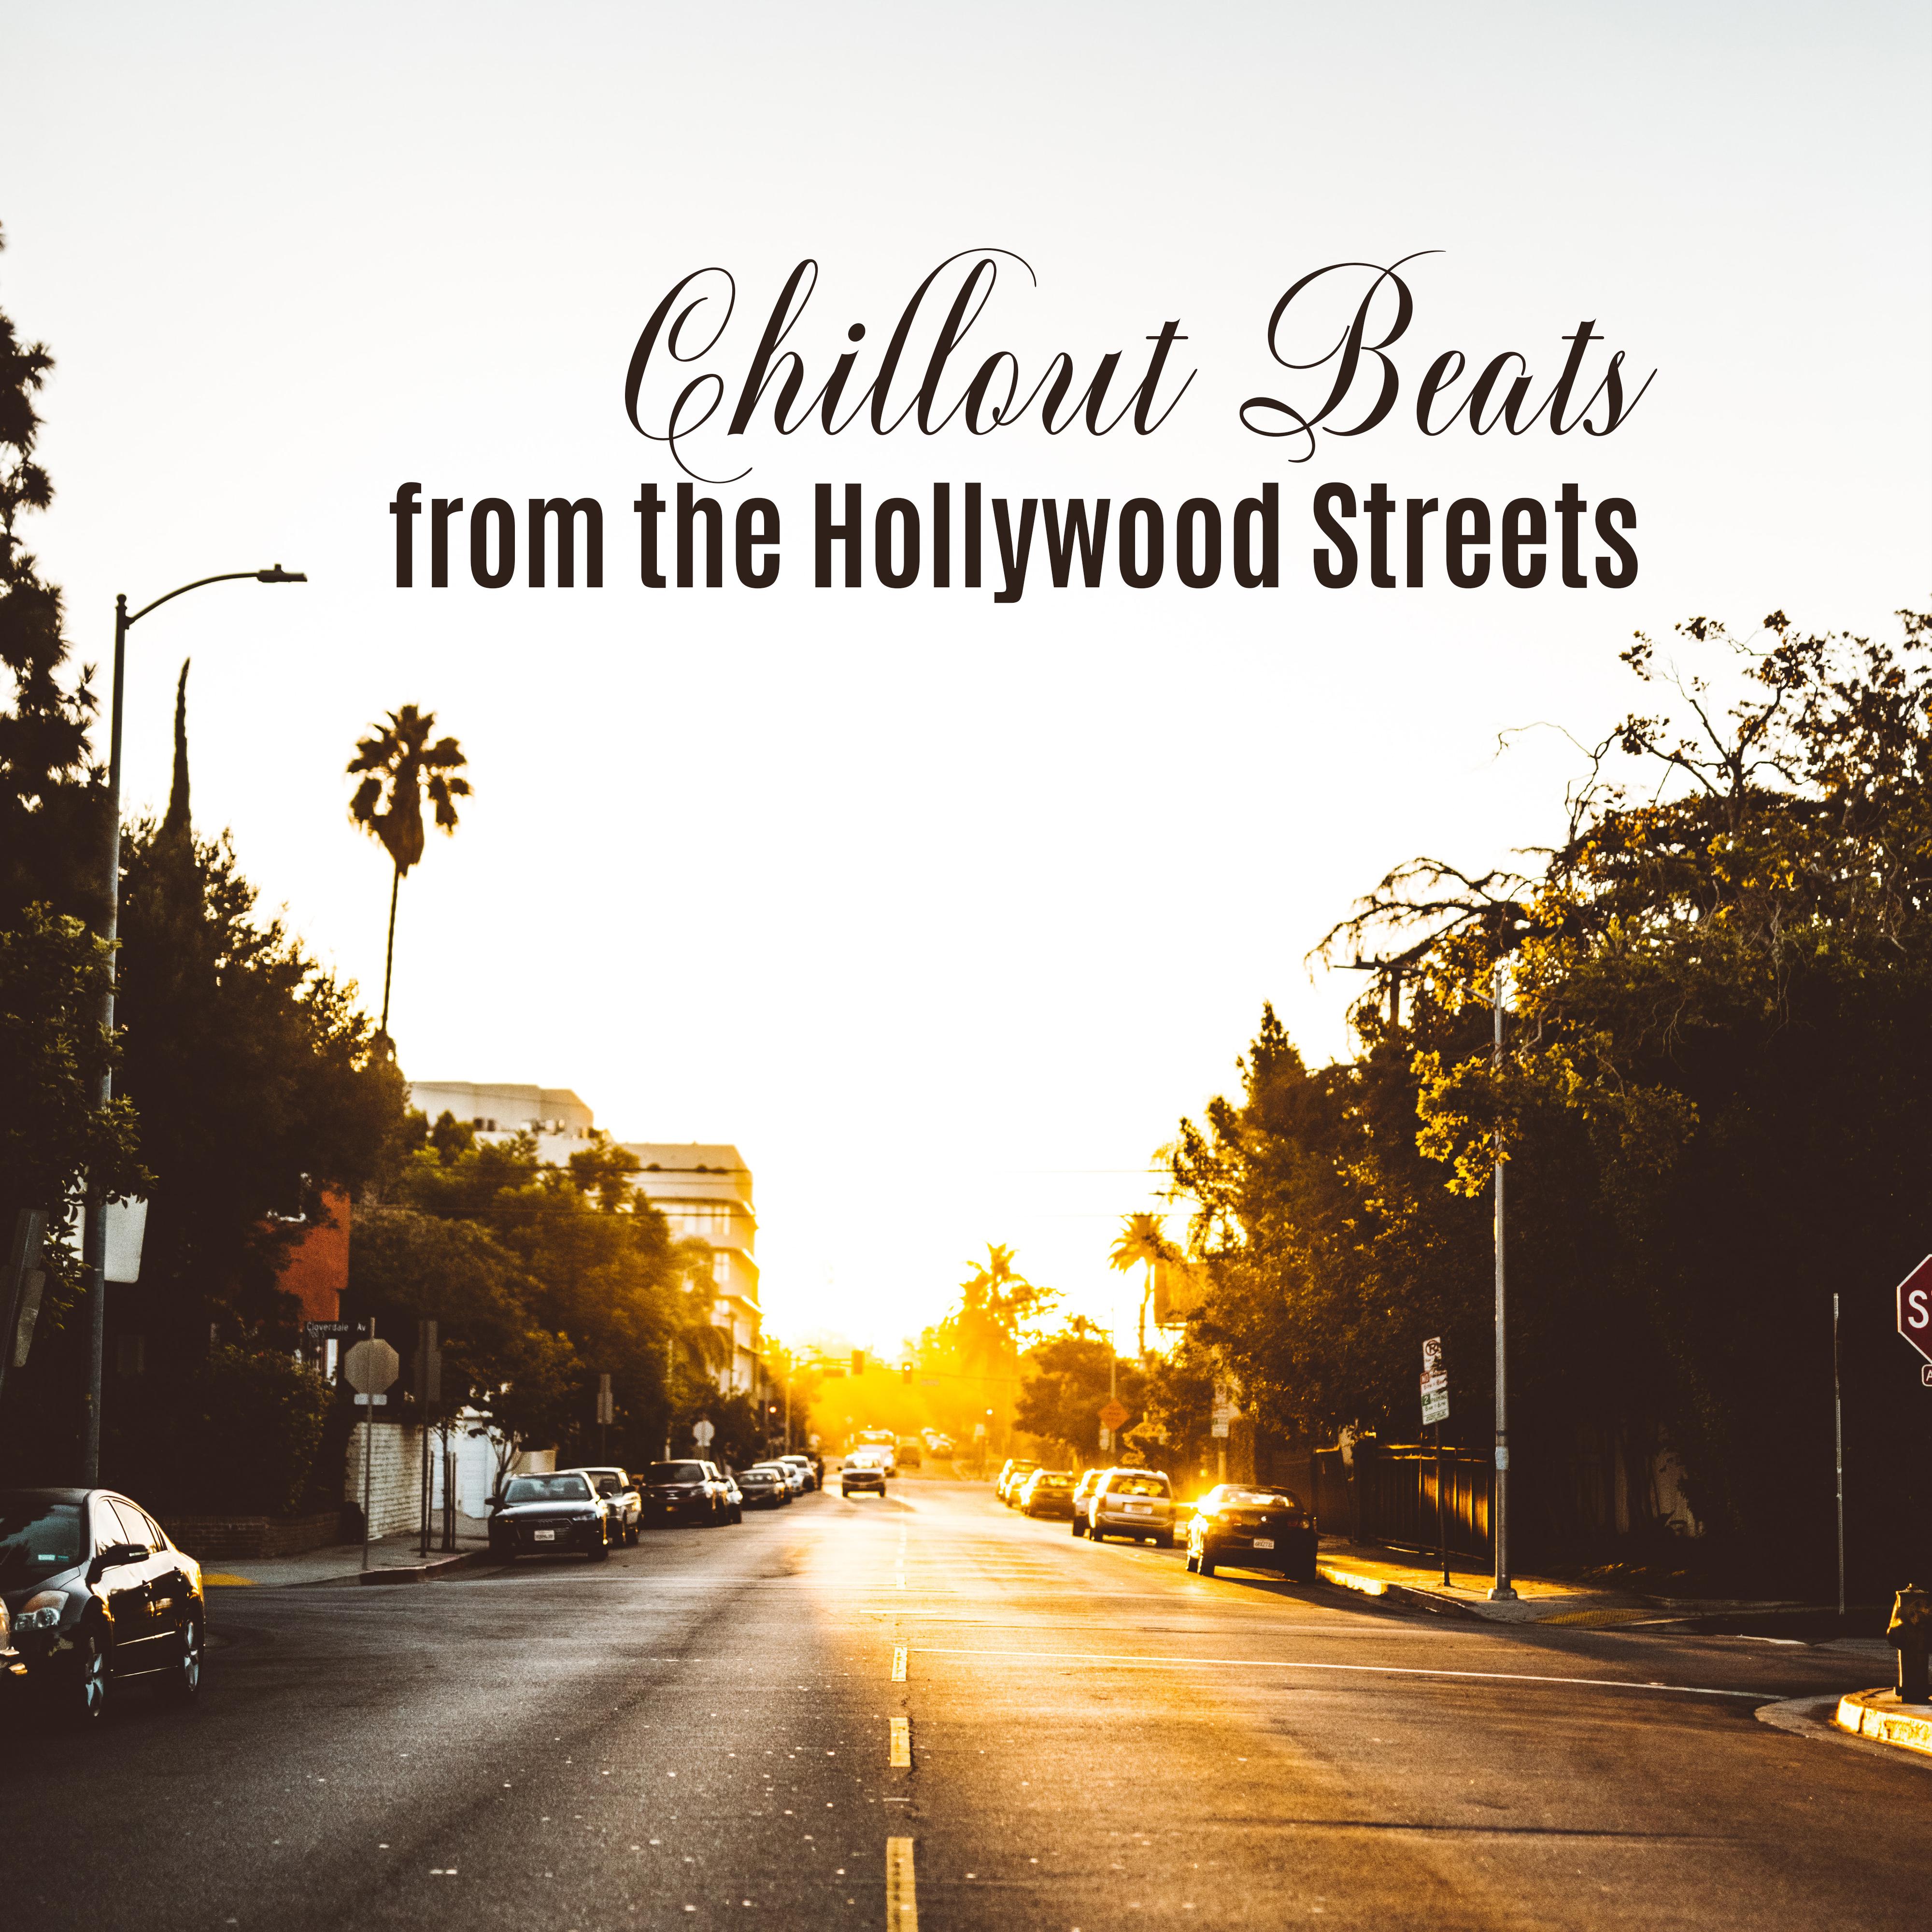 Chillout Beats from the Hollywood Streets: 2019 Chill Out VIP Music Mix, Elegant Club Lounge Beats, Celebrity Cocktail Party in the Big Mansion, Sweet LA Nightlife Anthems